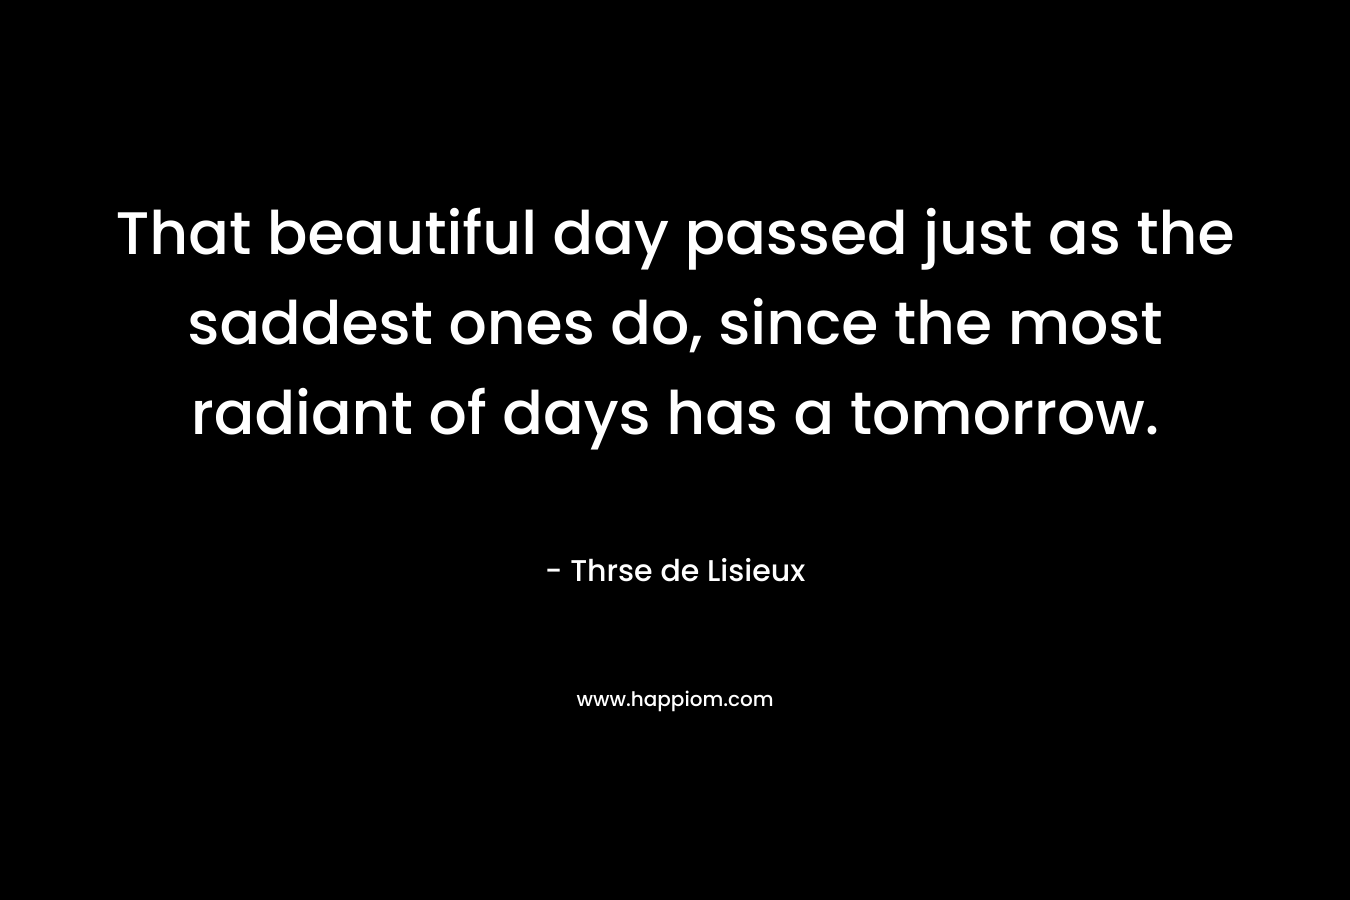 That beautiful day passed just as the saddest ones do, since the most radiant of days has a tomorrow.